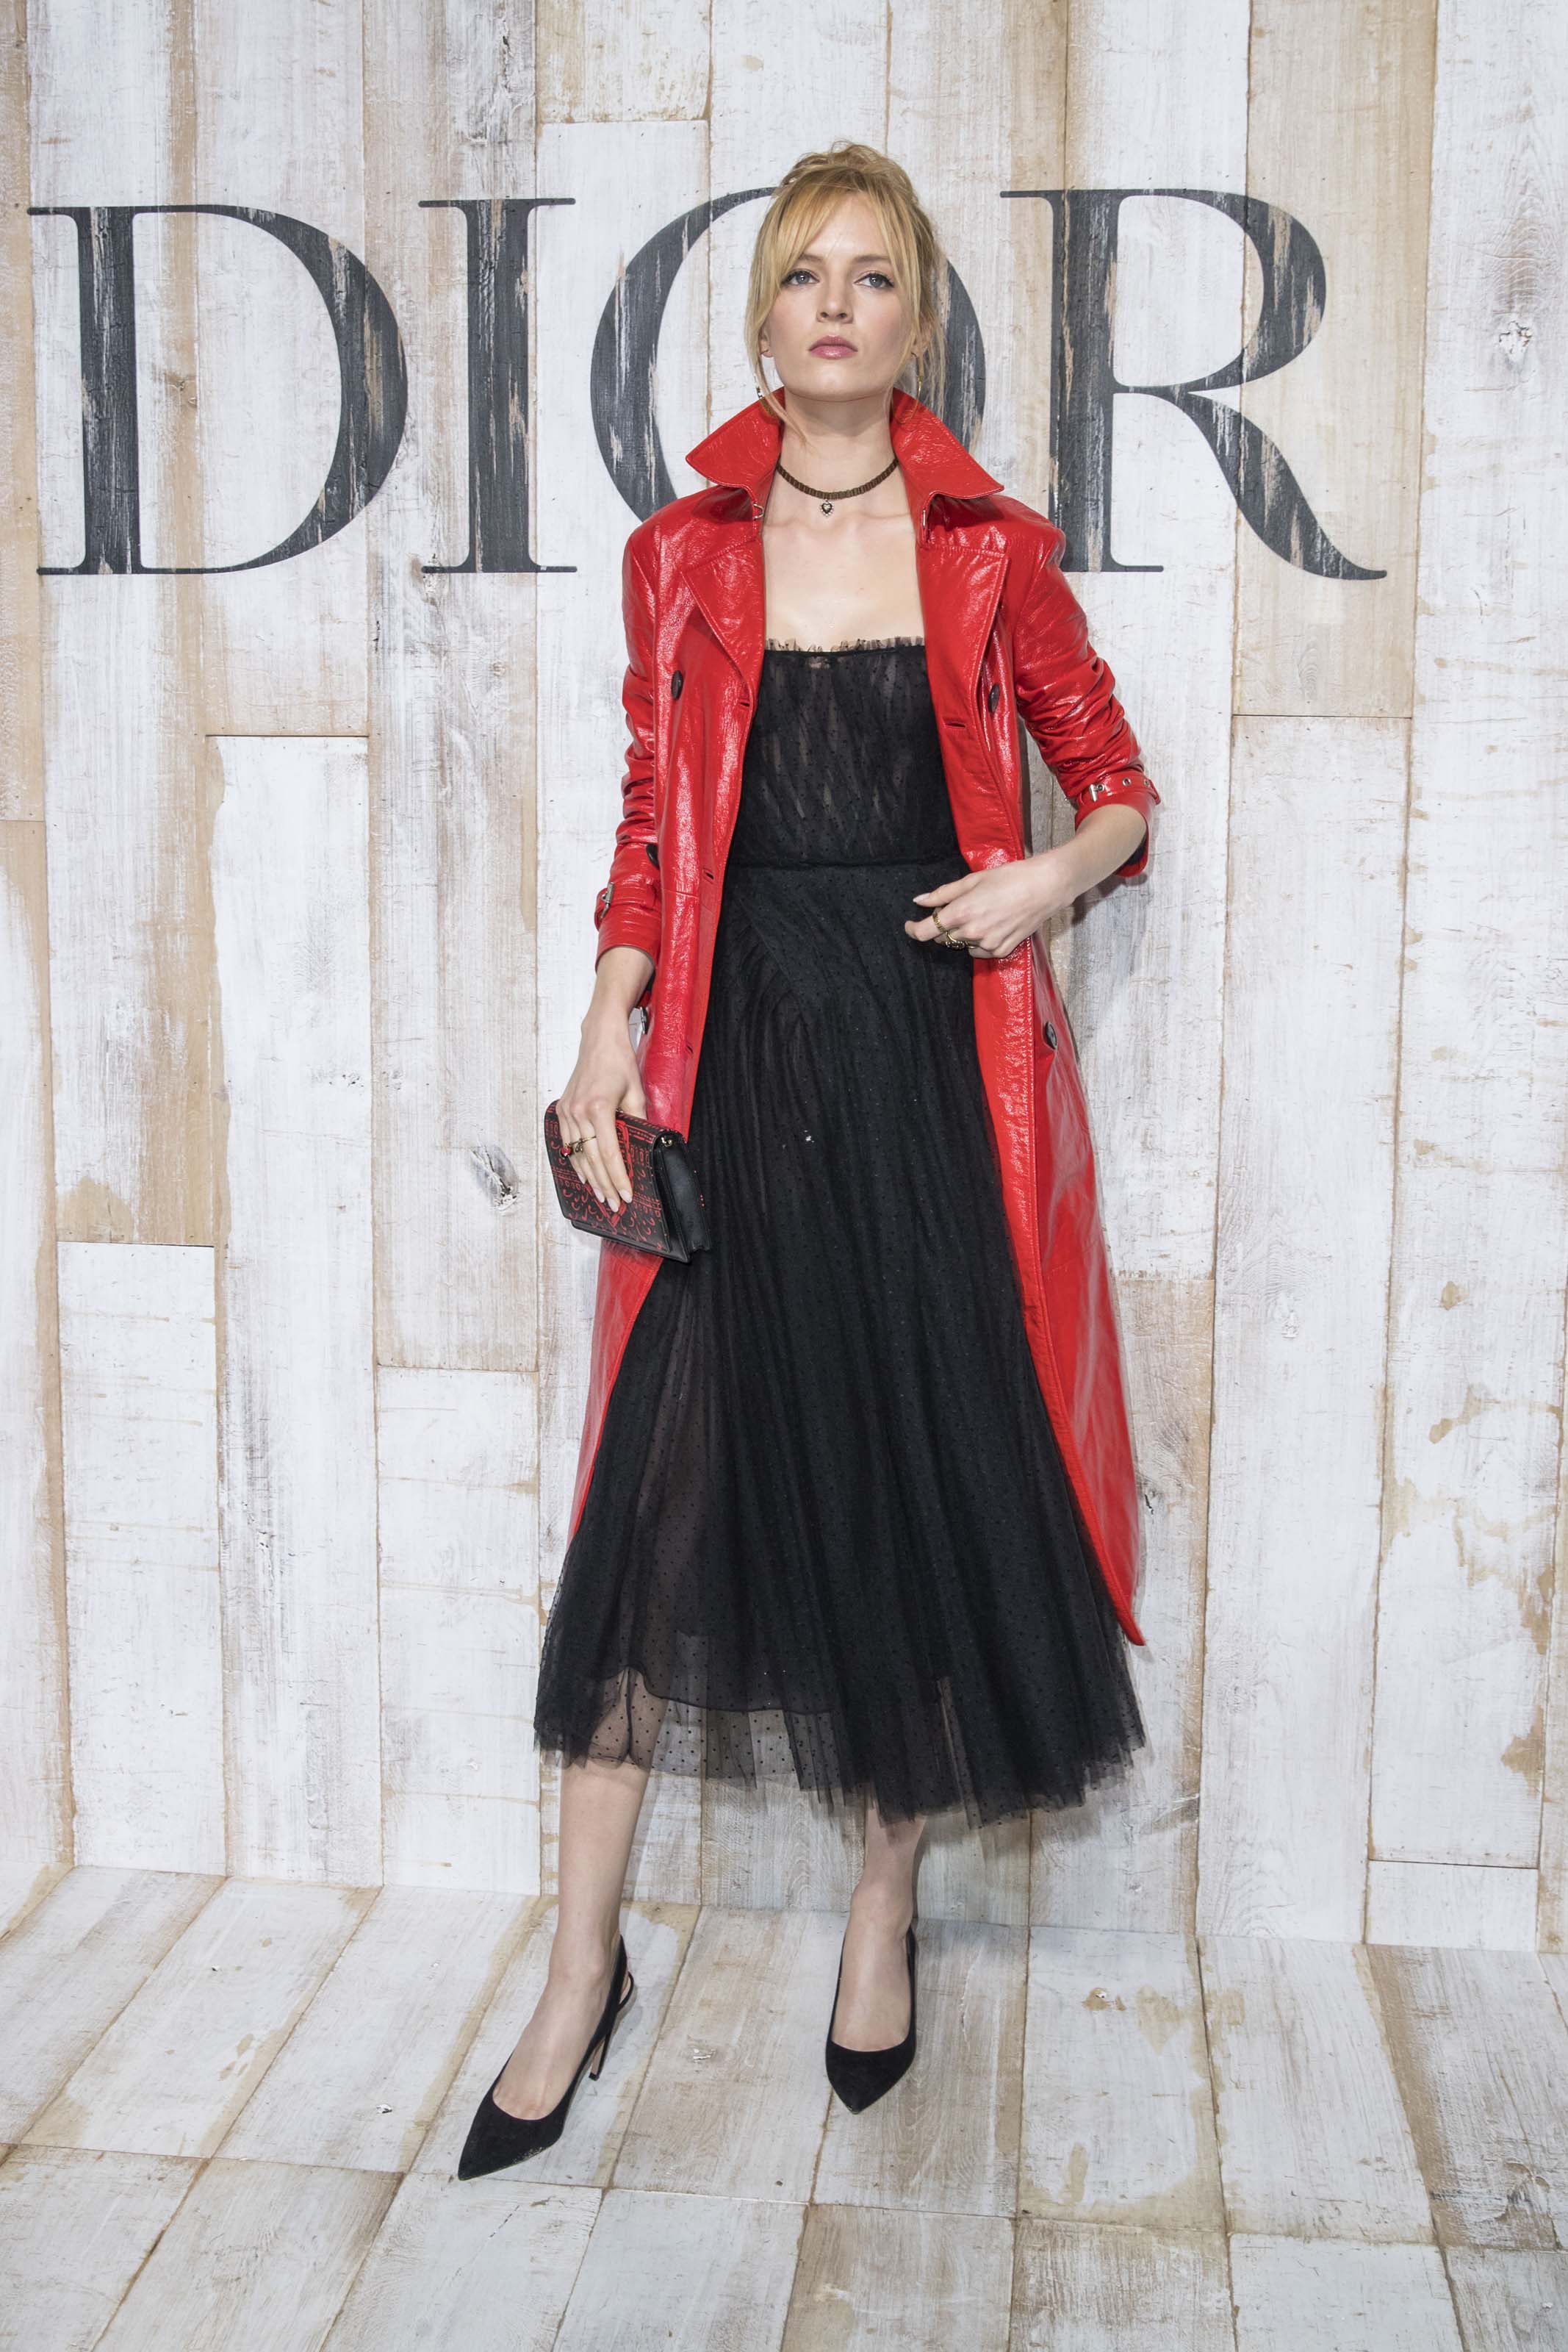 Daria Strokous attends Christian Dior Couture Cruise Collection Photocall